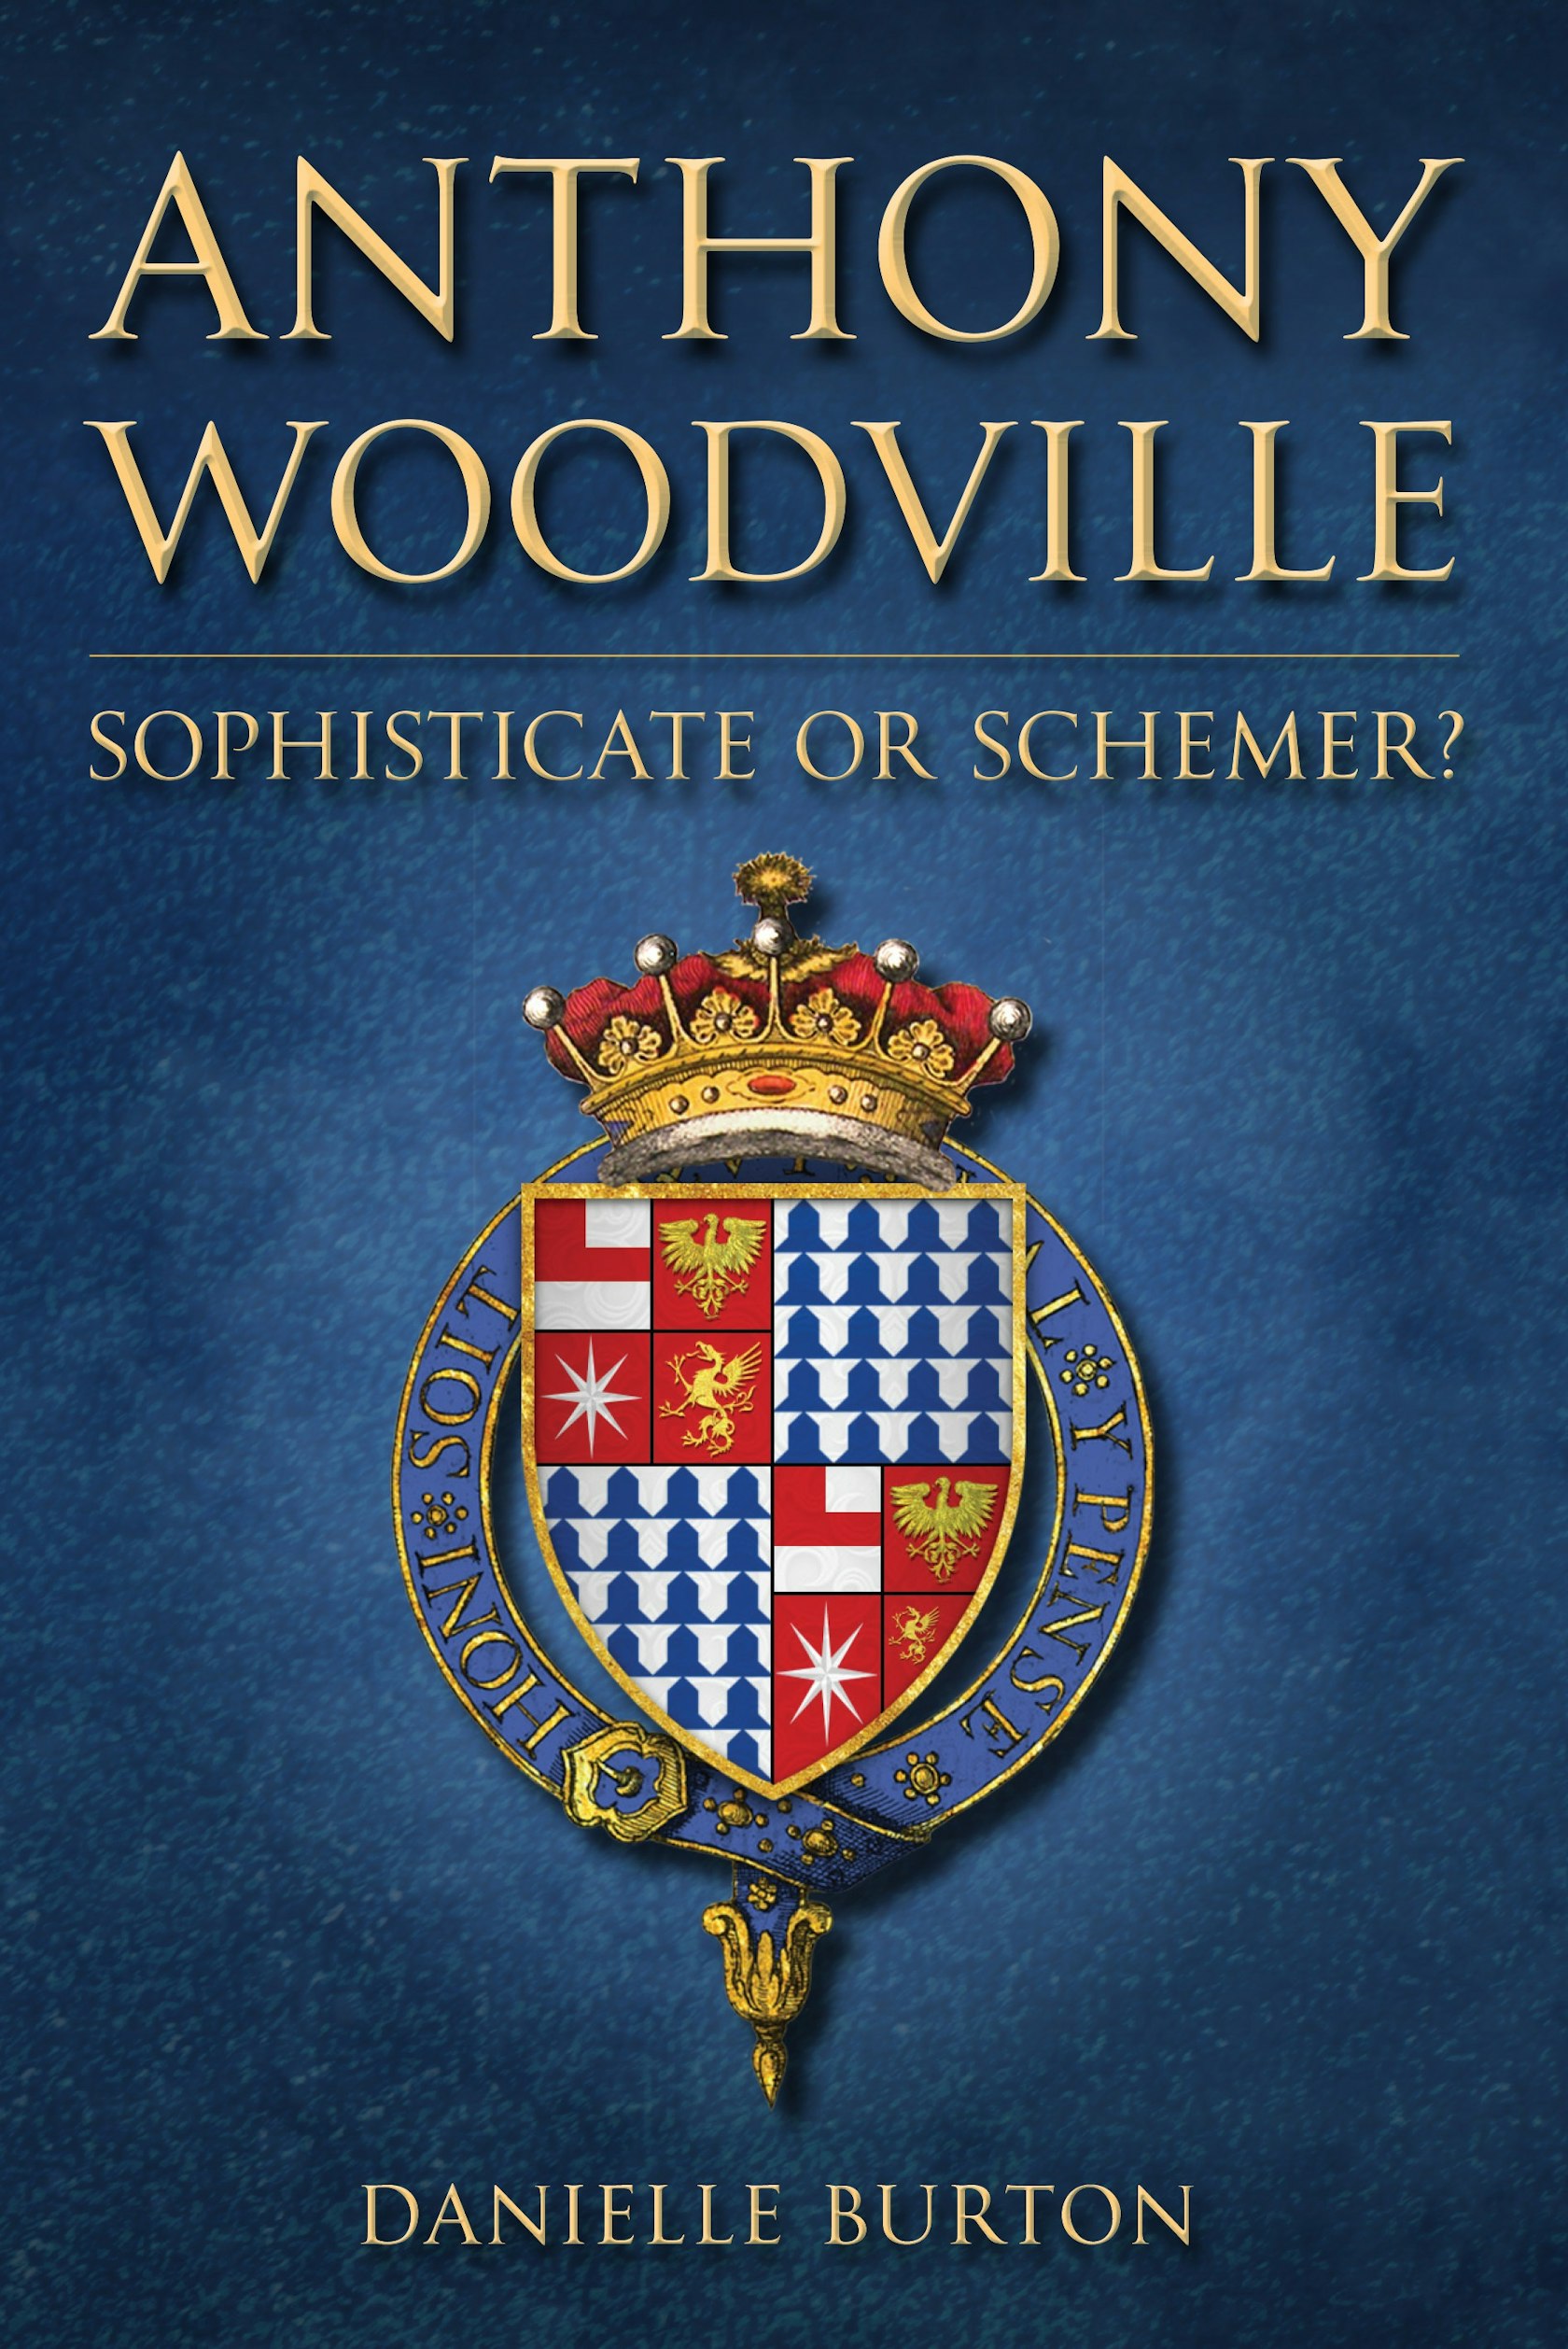 Anthony Woodville- Sophisticate or Schemer.